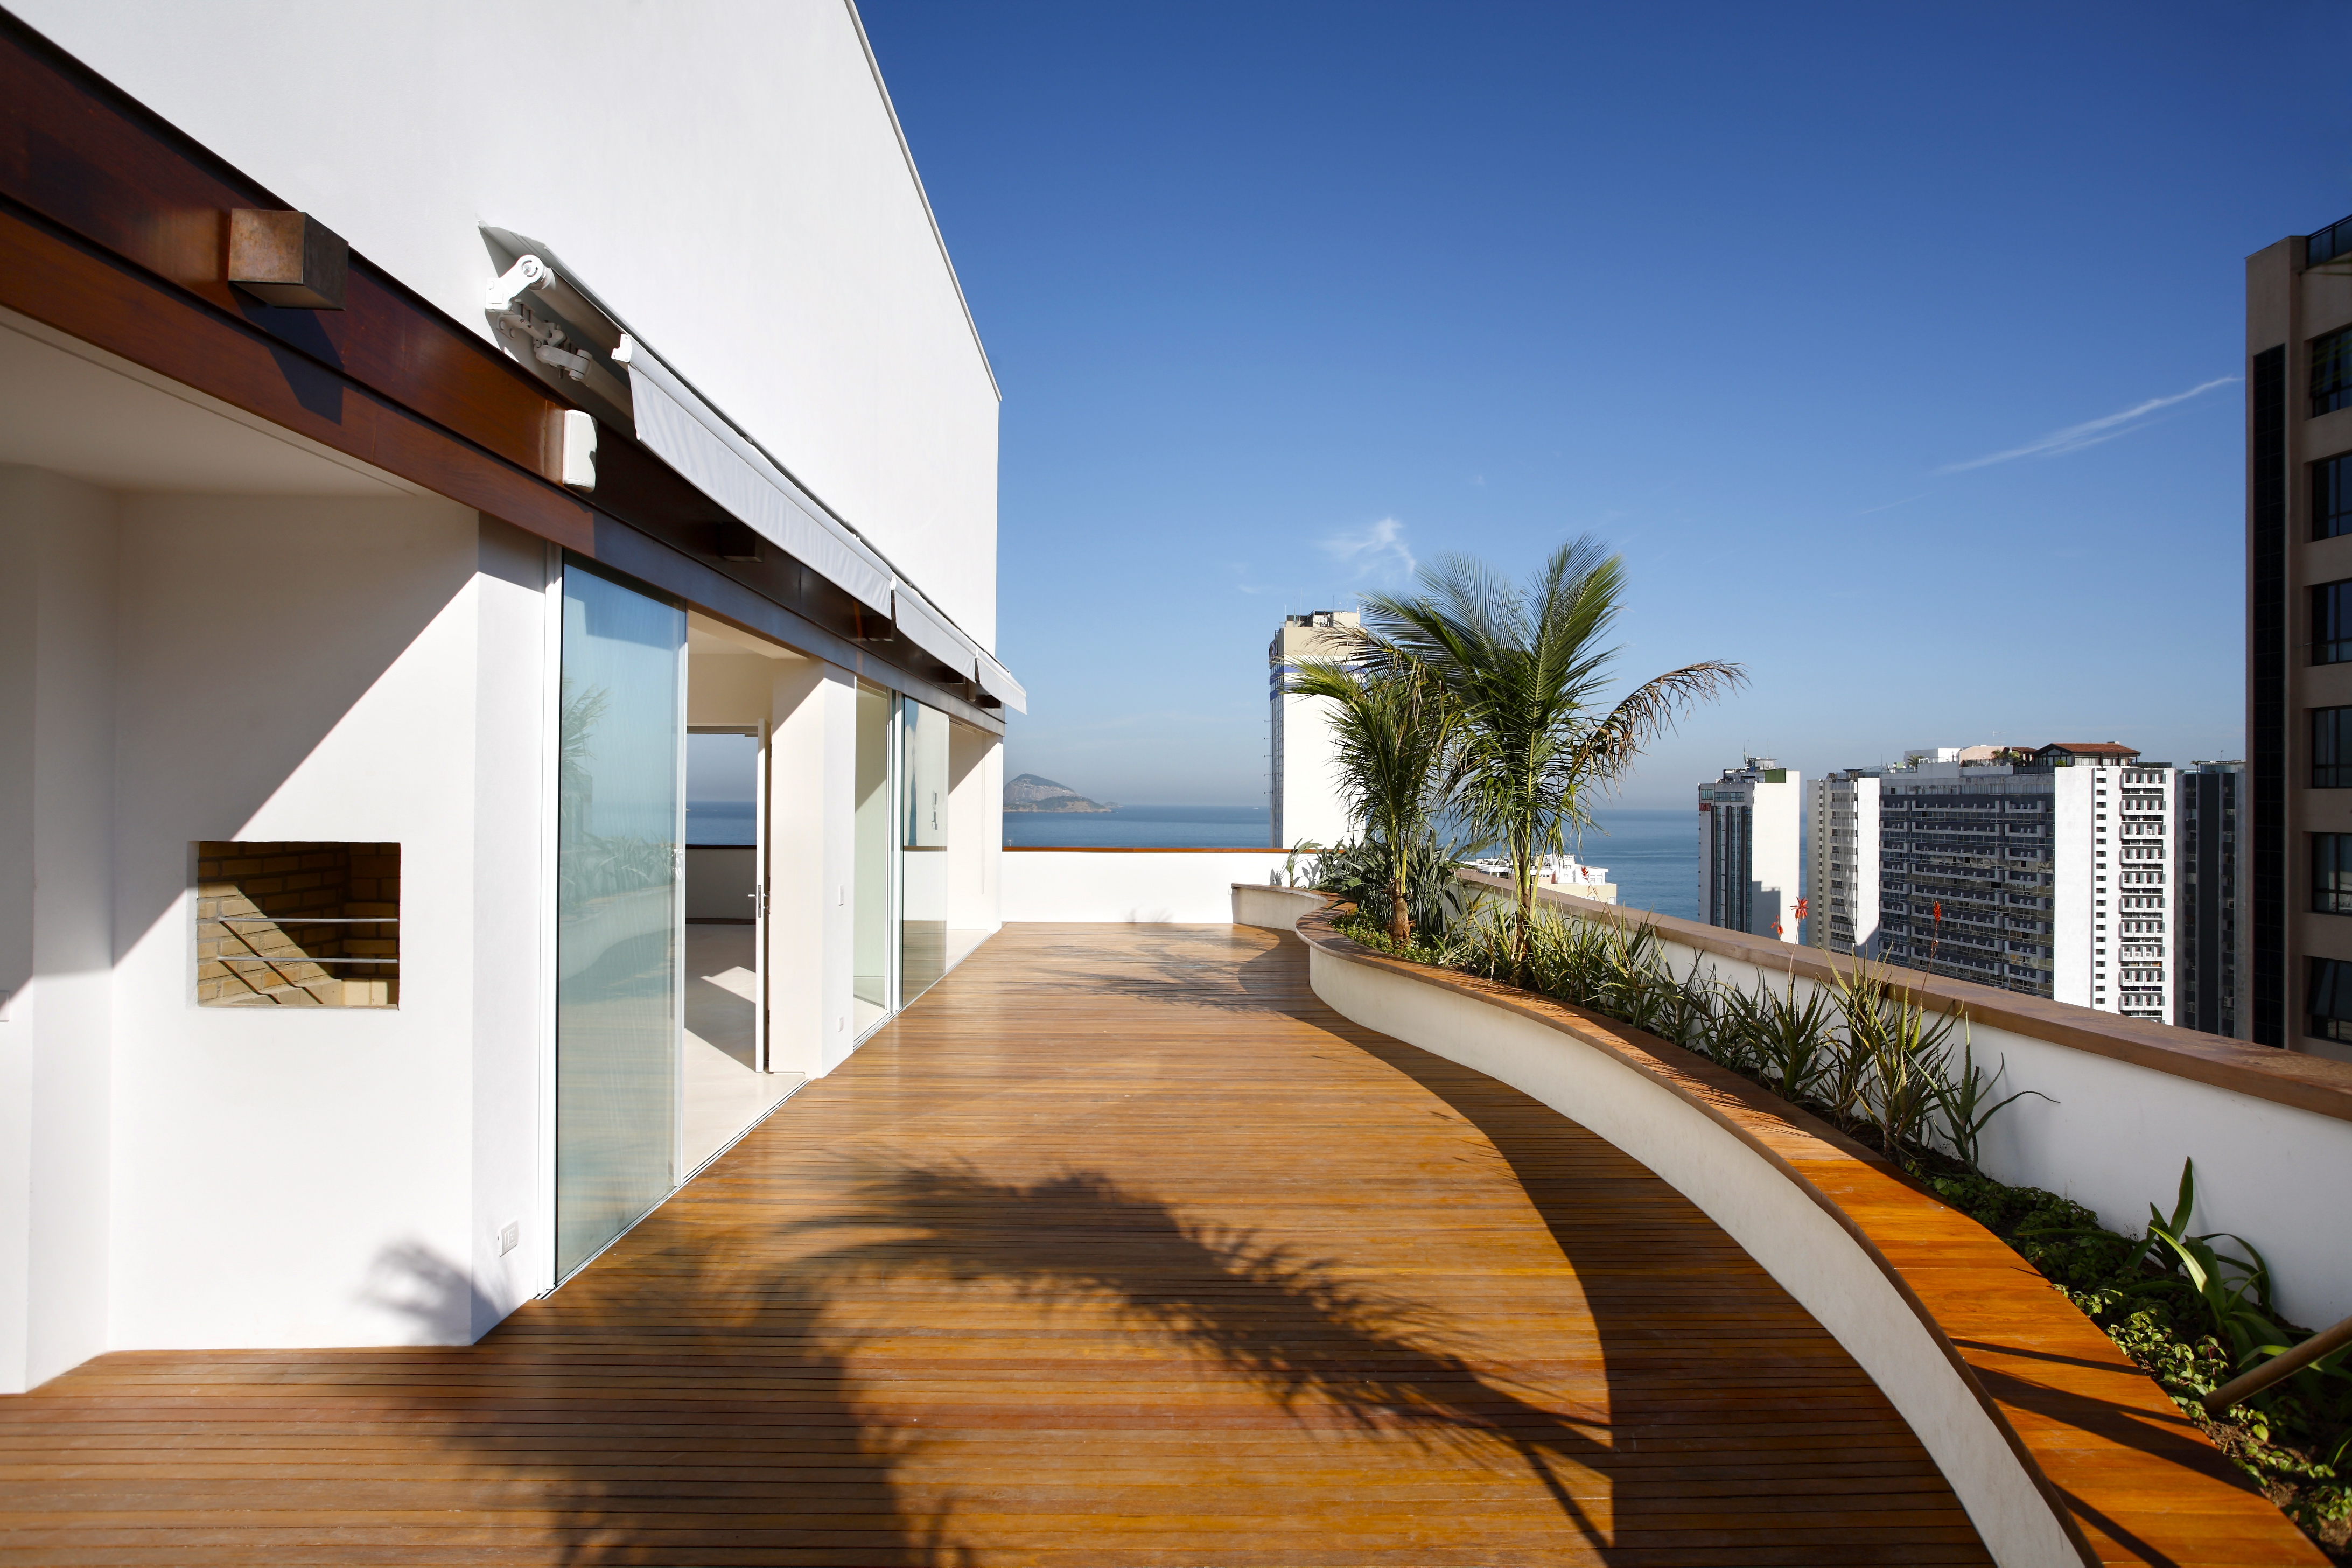 New Property Listings and Sales Soar Across Brazil